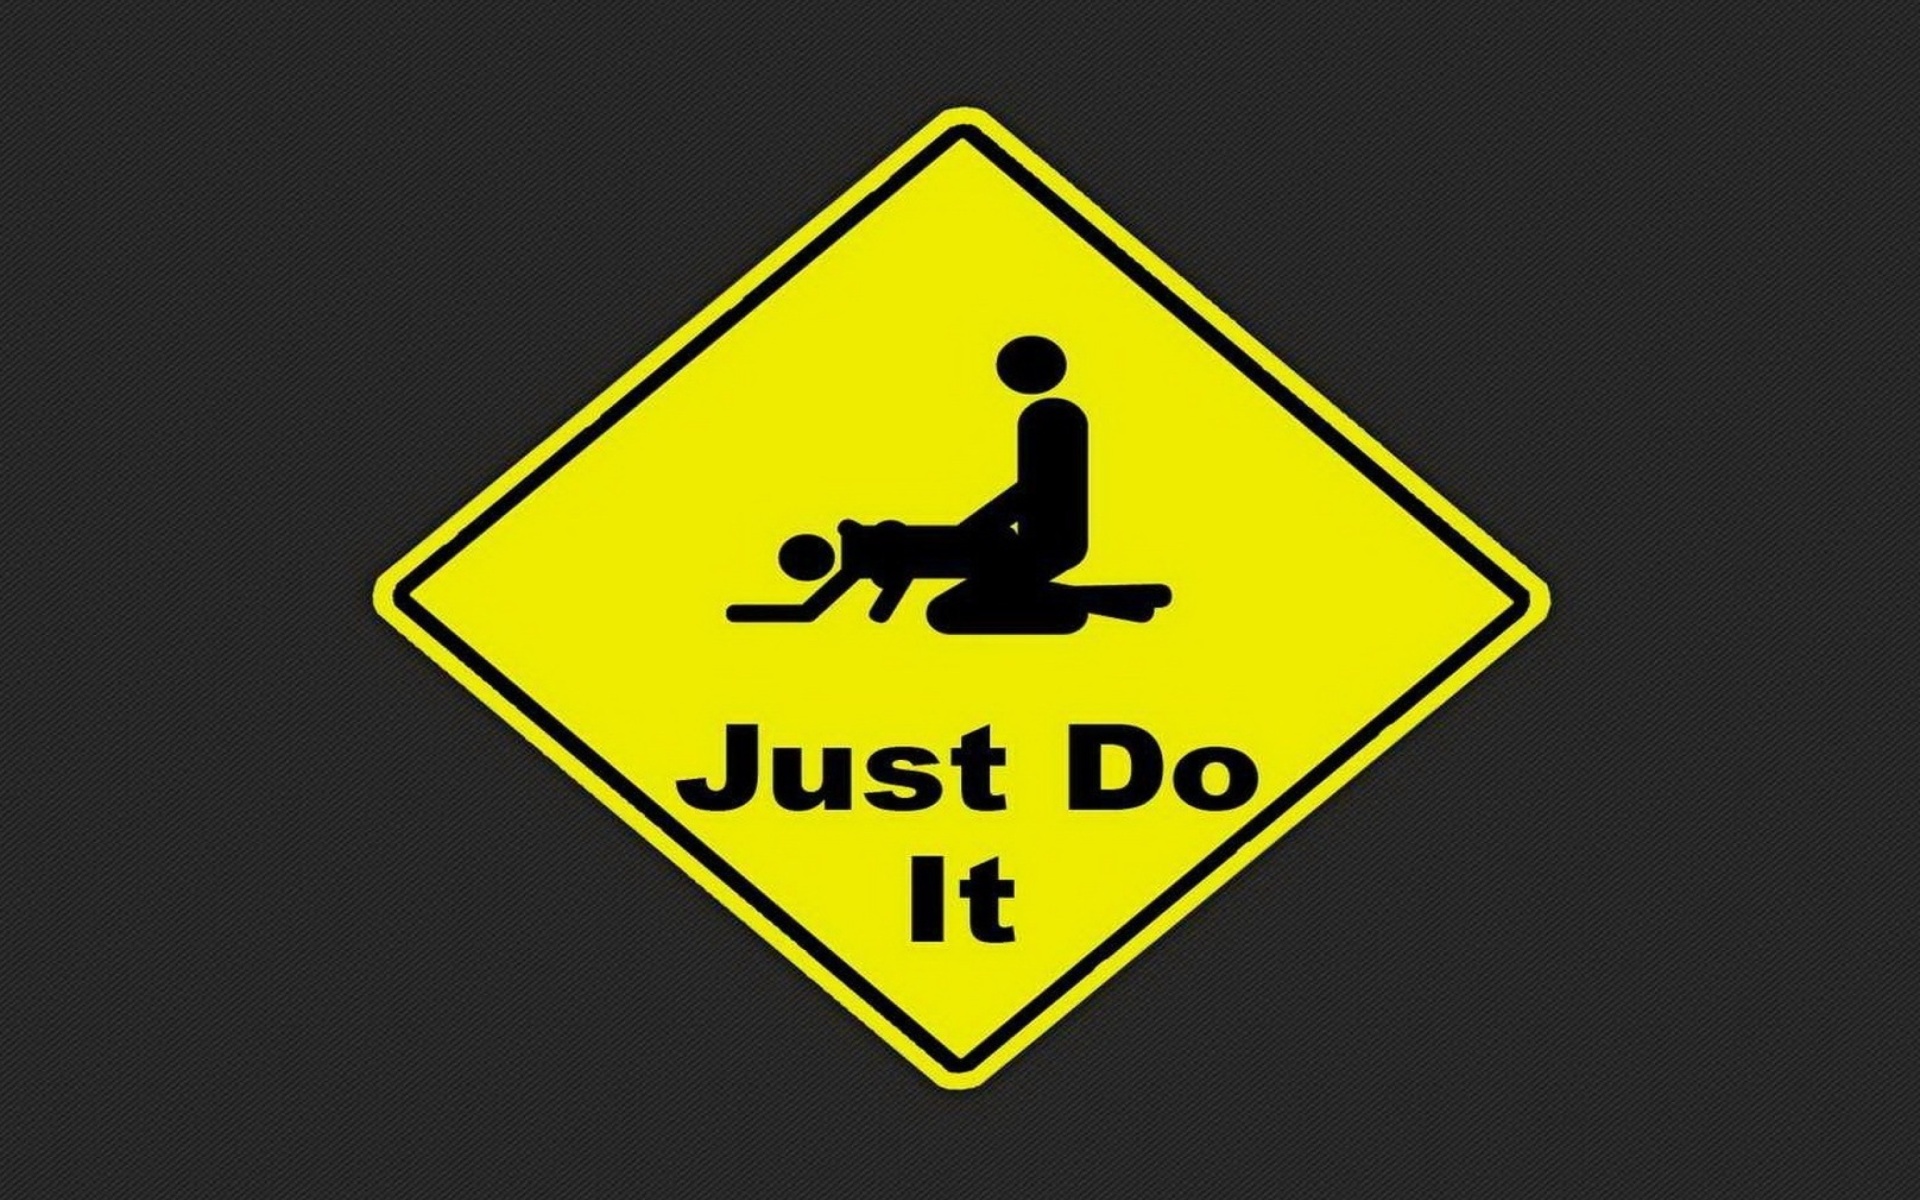 Just Do It Funny Sign screenshot #1 1920x1200